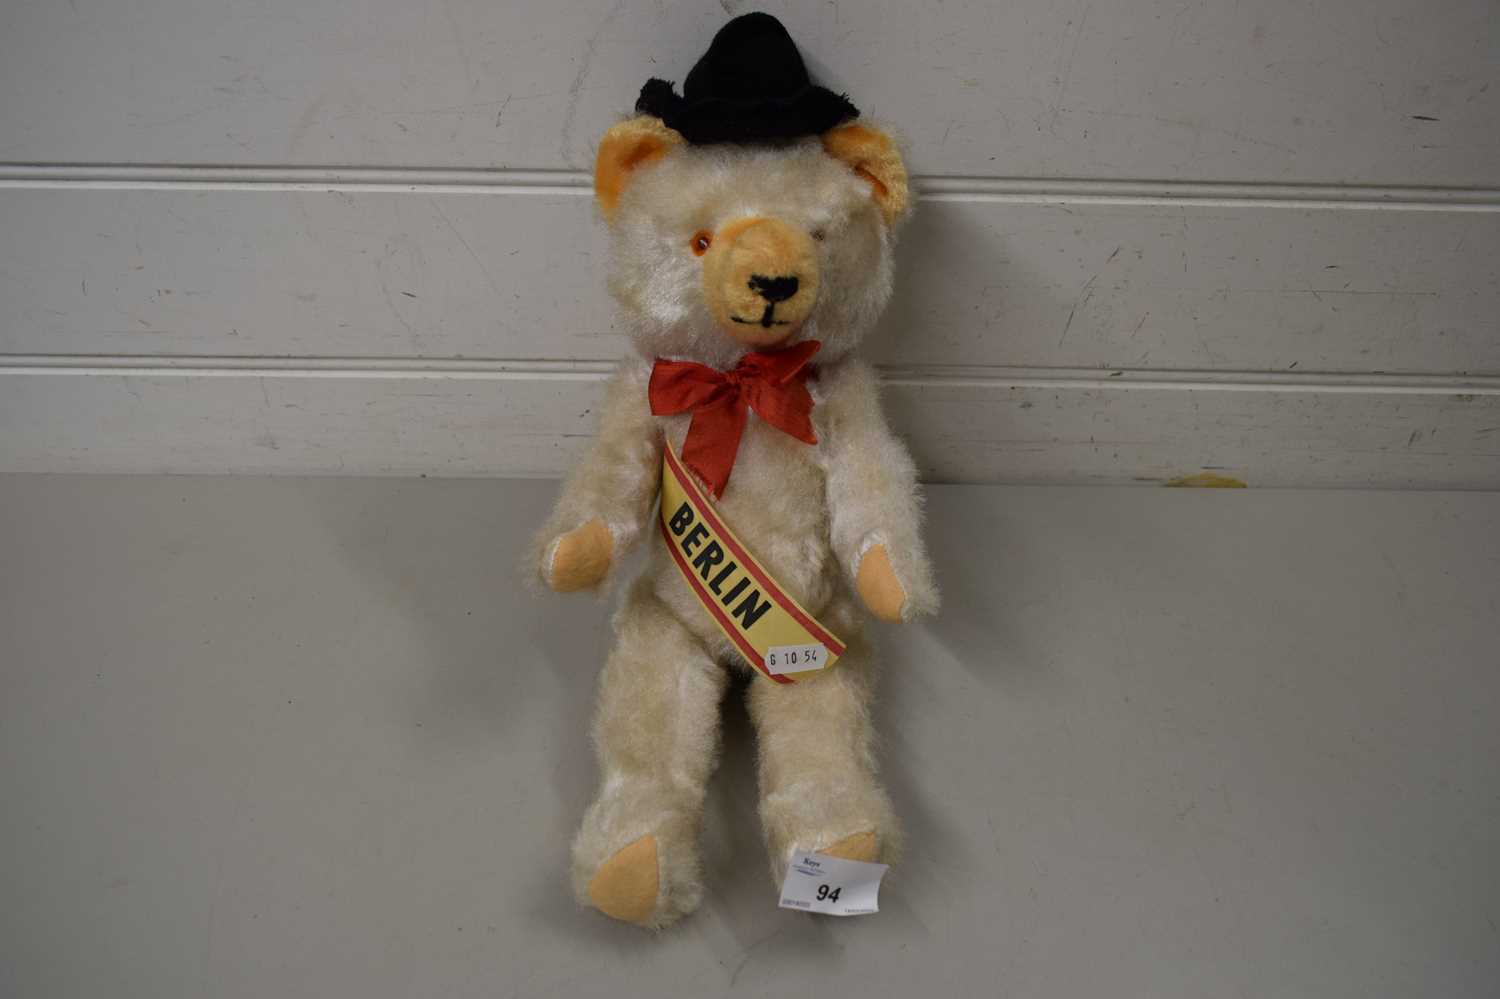 Lot 94 - VINTAGE ARTICULATED TEDDY BEAR MARKED 'BERLIN'